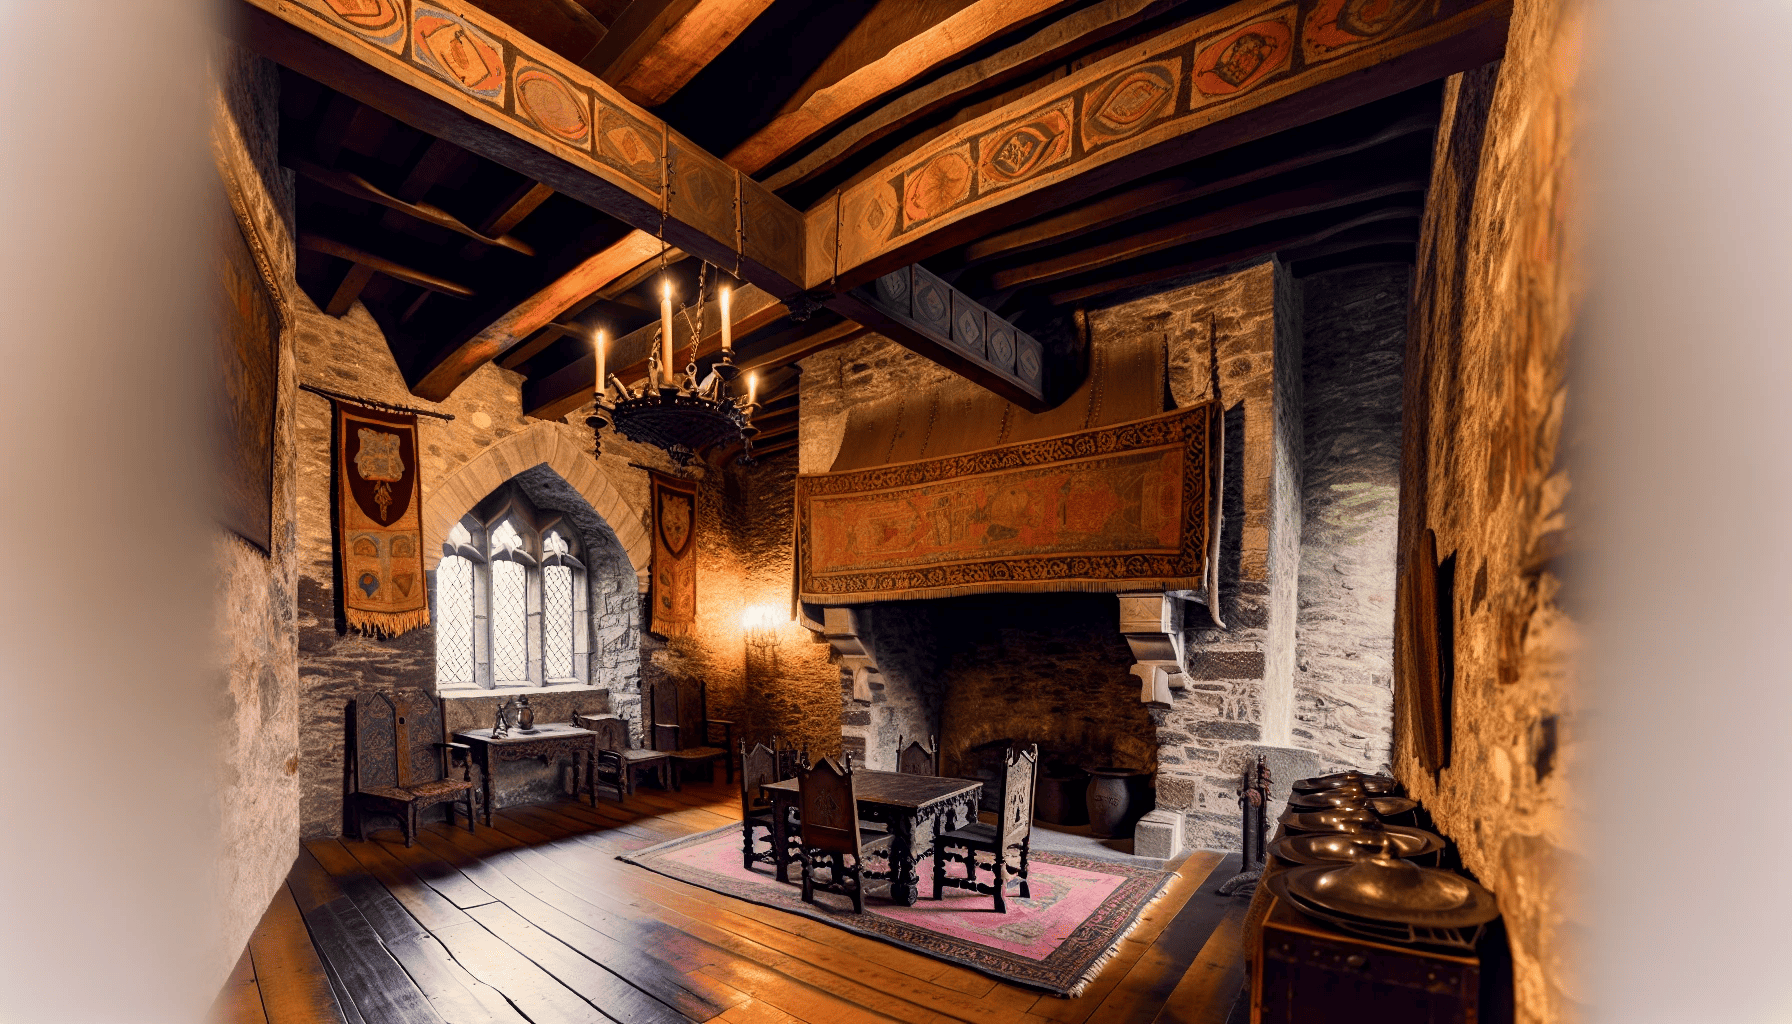 Restored medieval interiors of Bunratty Castle tower house